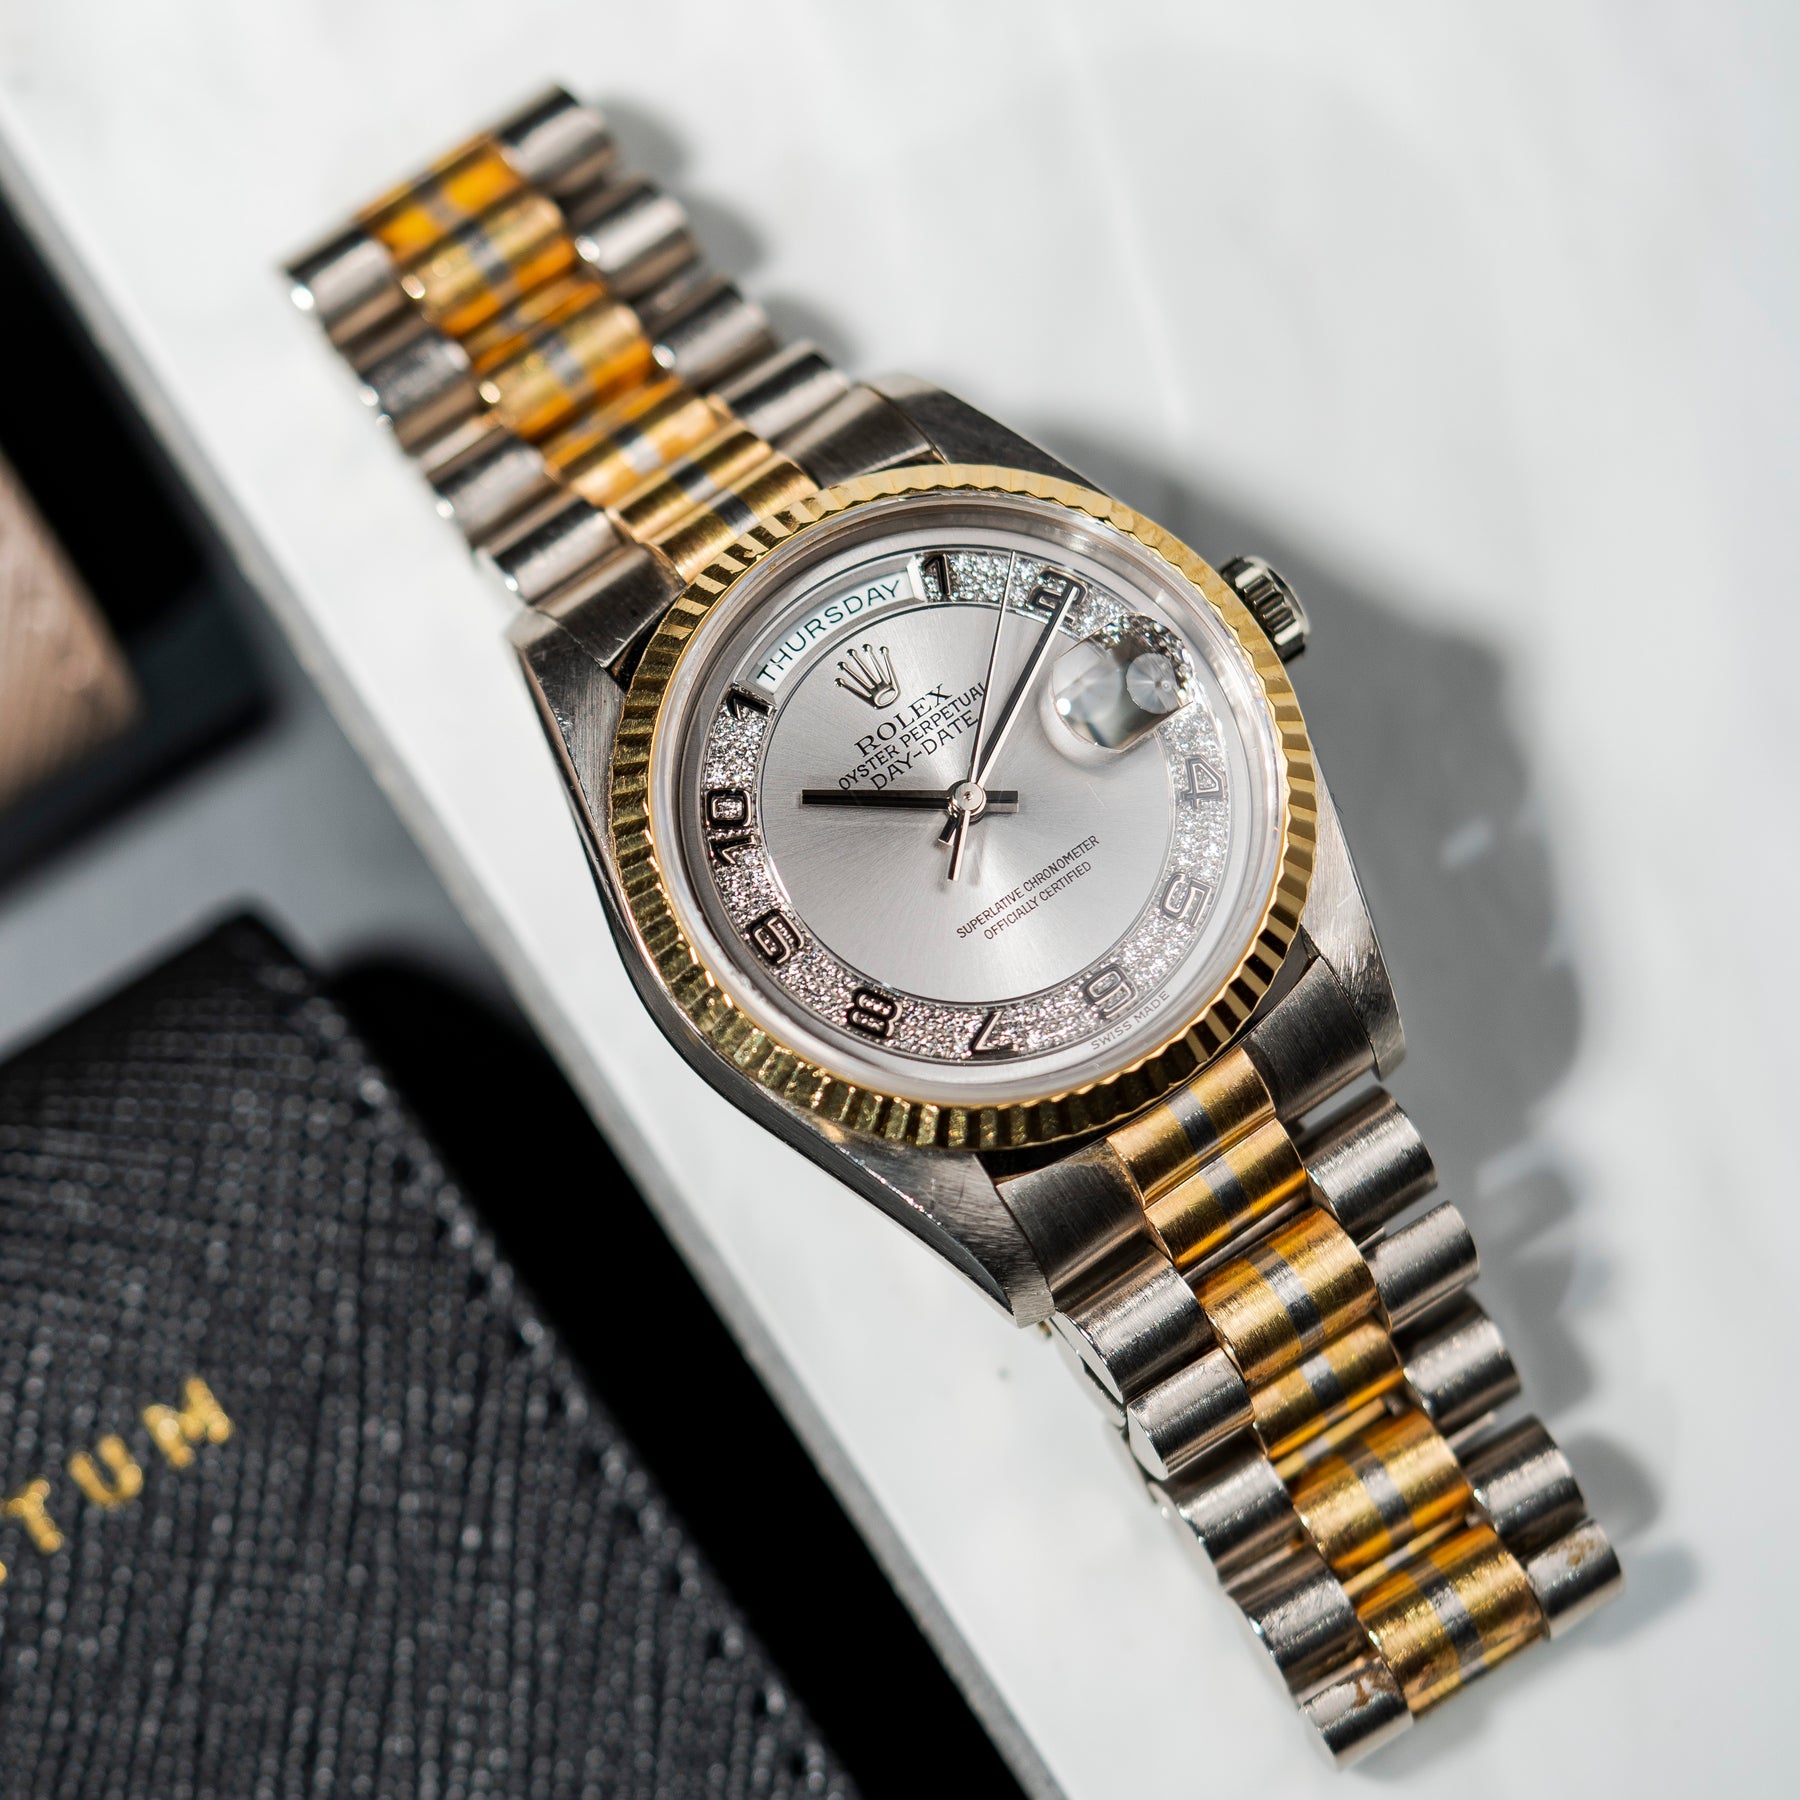 1993 Rolex Day Date Tridor Myriad Diamond Dial Ref. 18239B (with Papers & RSC)